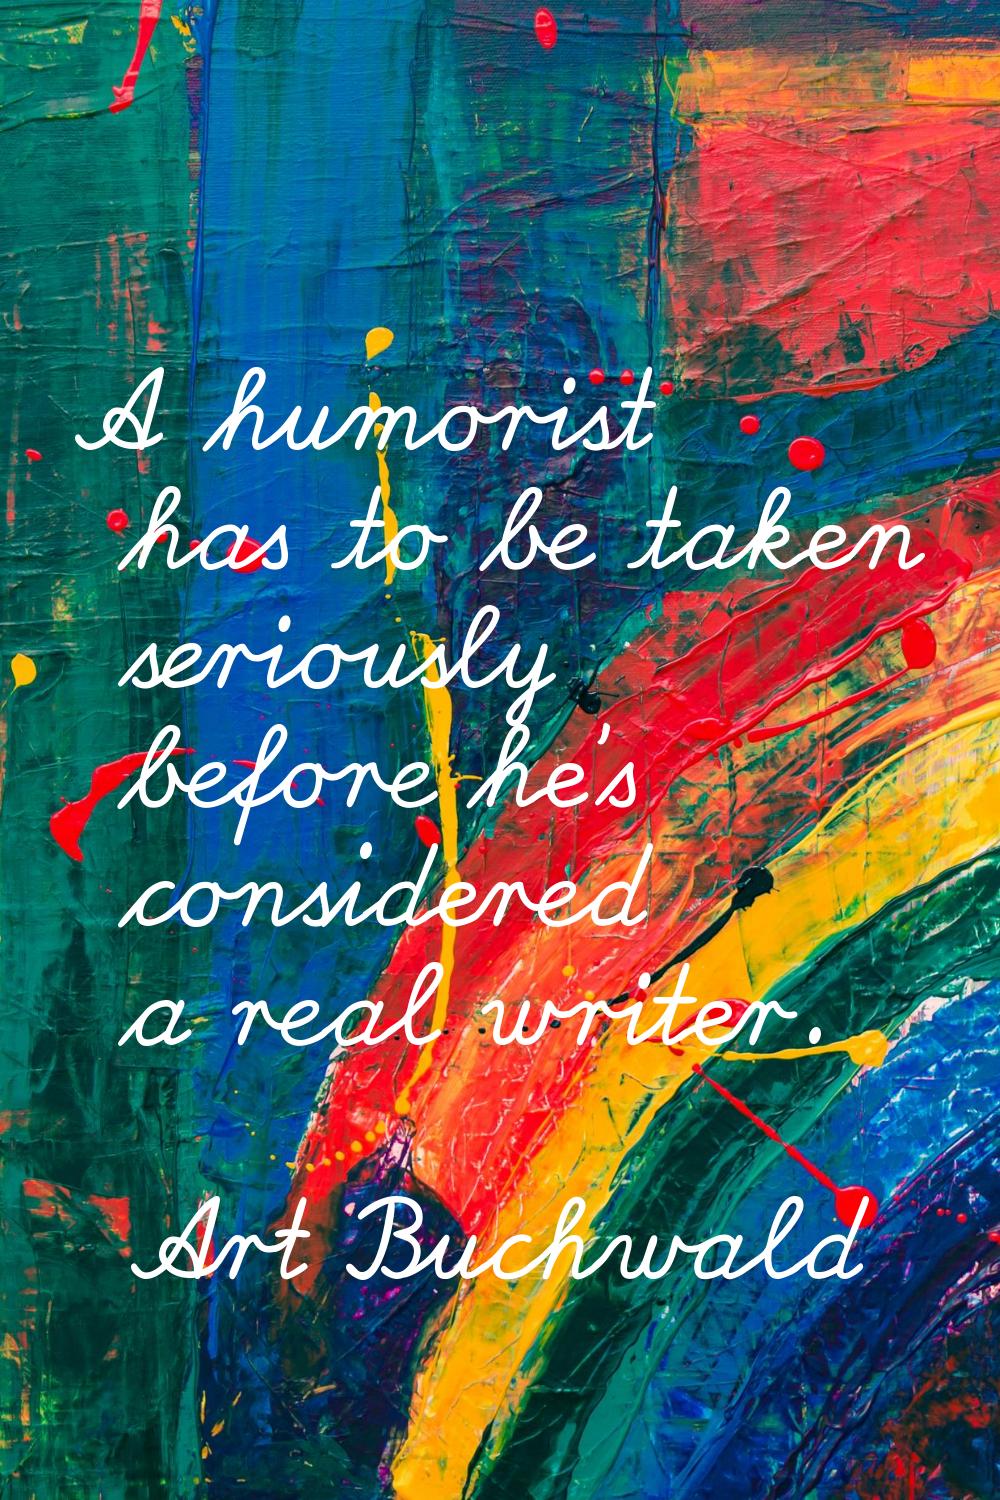 A humorist has to be taken seriously before he's considered a real writer.